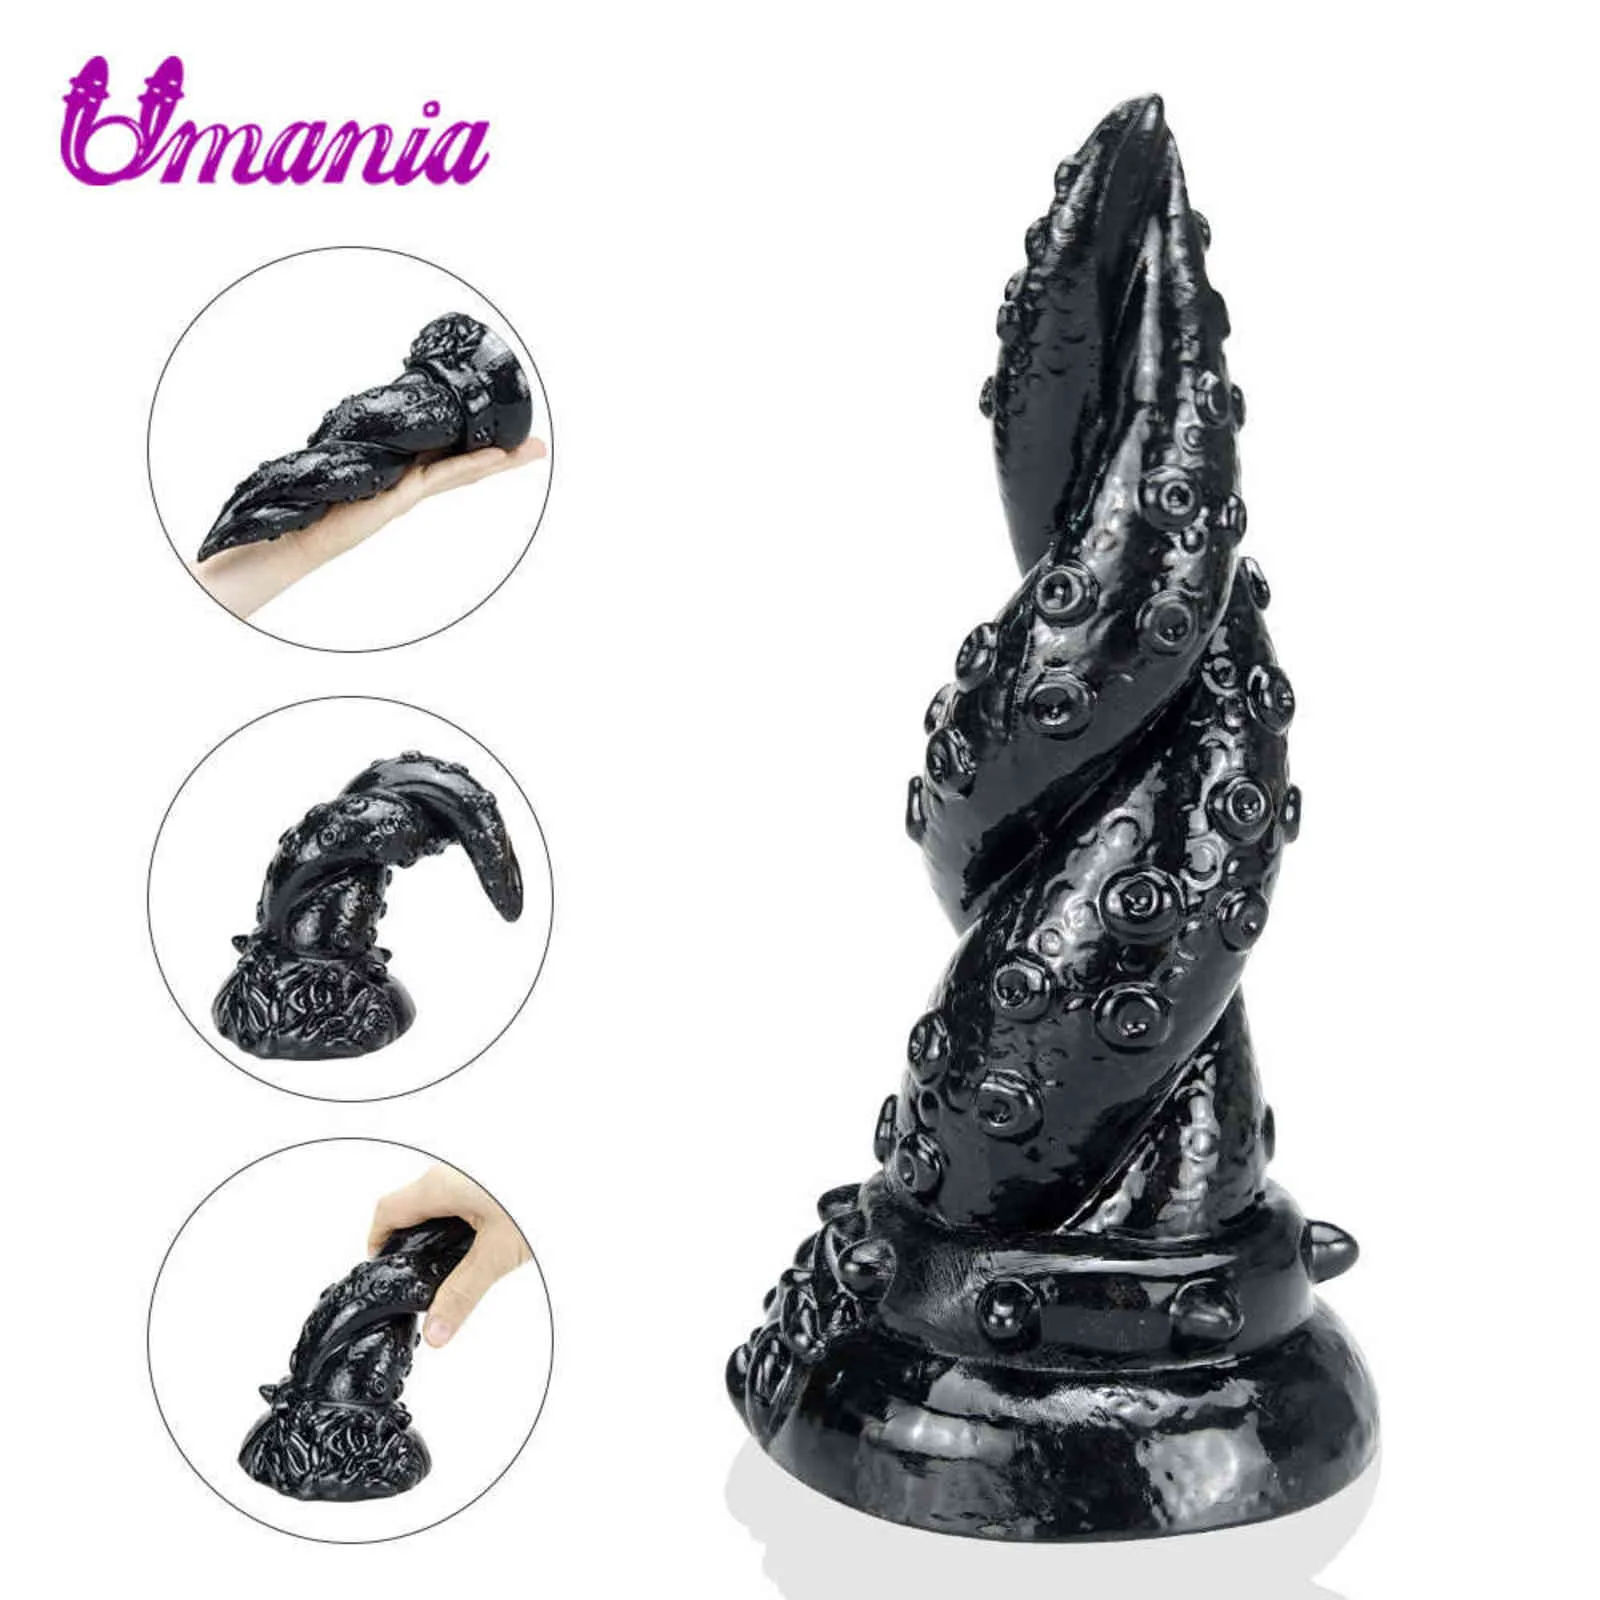 NXY Dildos Realistic Octopus Tentacle Dildo Huge Penis Soft Healthy Pvc Butt Plug Sex Toys for Women Lesbian with Suction Cup Adult Product 1119